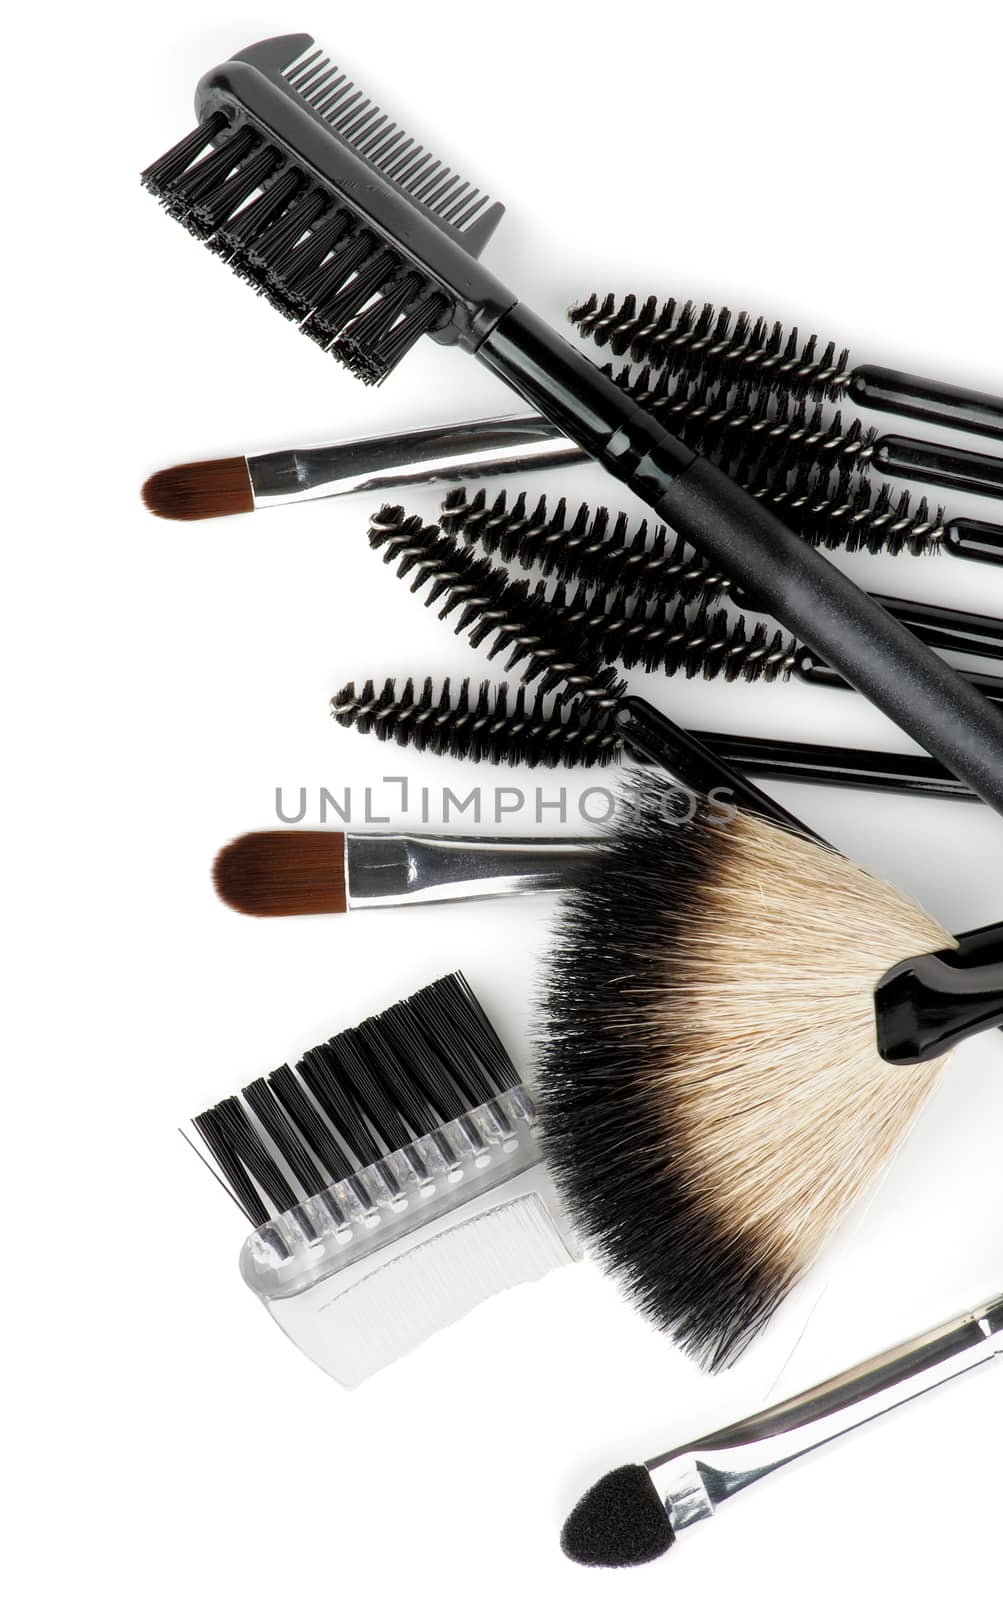 Heap of Various Make-up Brushes and Applicators closeup on white background. Top View